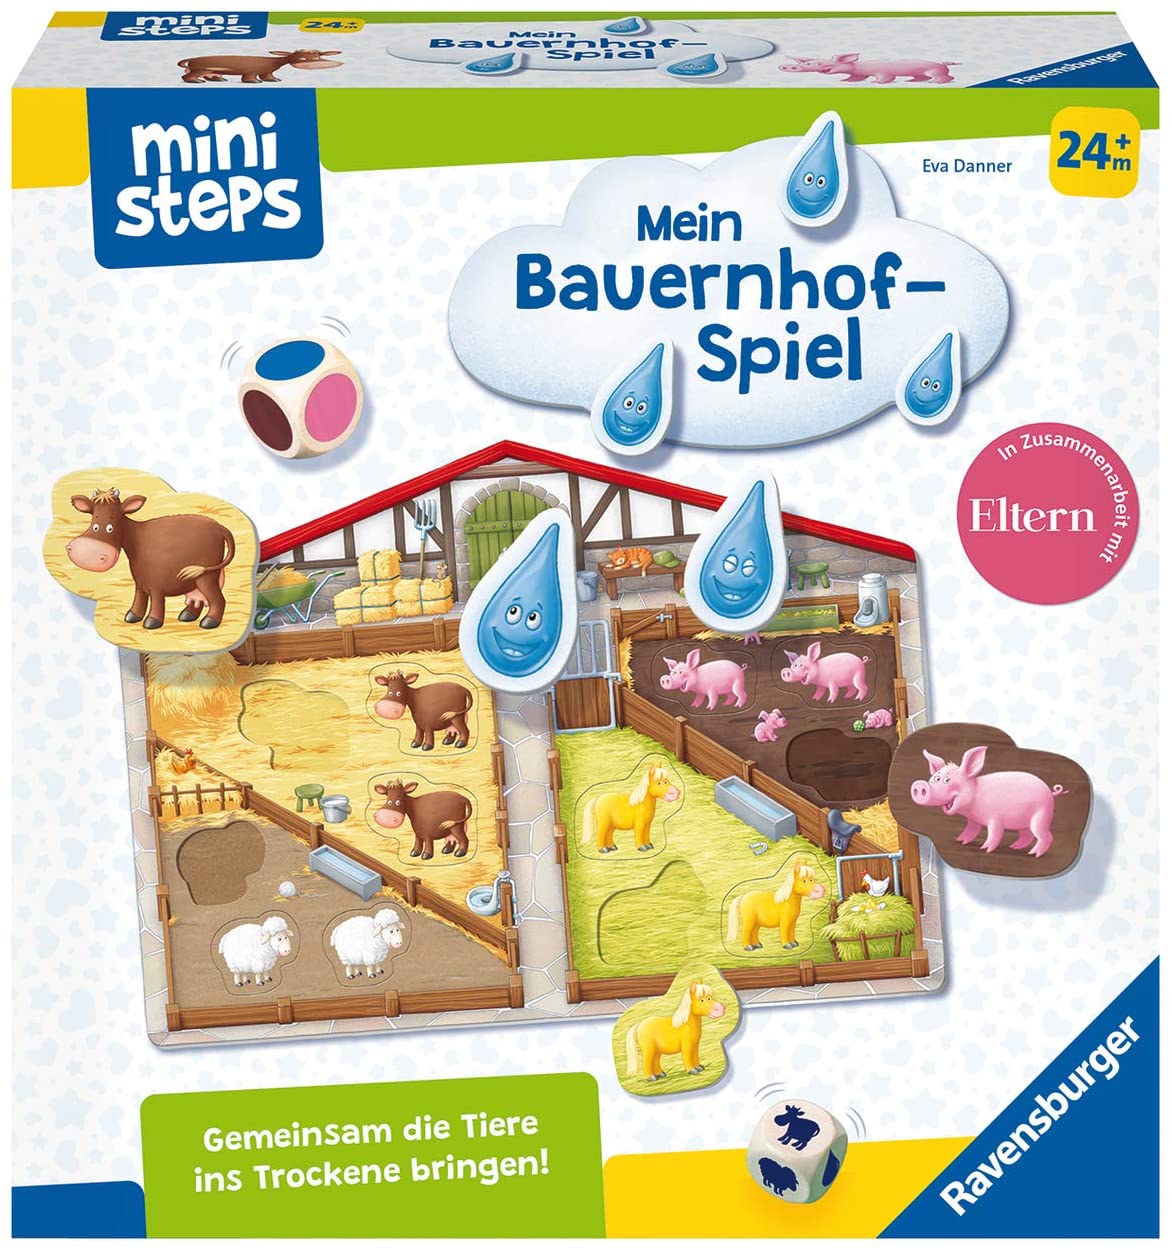 Ravensburger Ministeps 4173 Our Farm Game, Childrens Game To Learn Colours